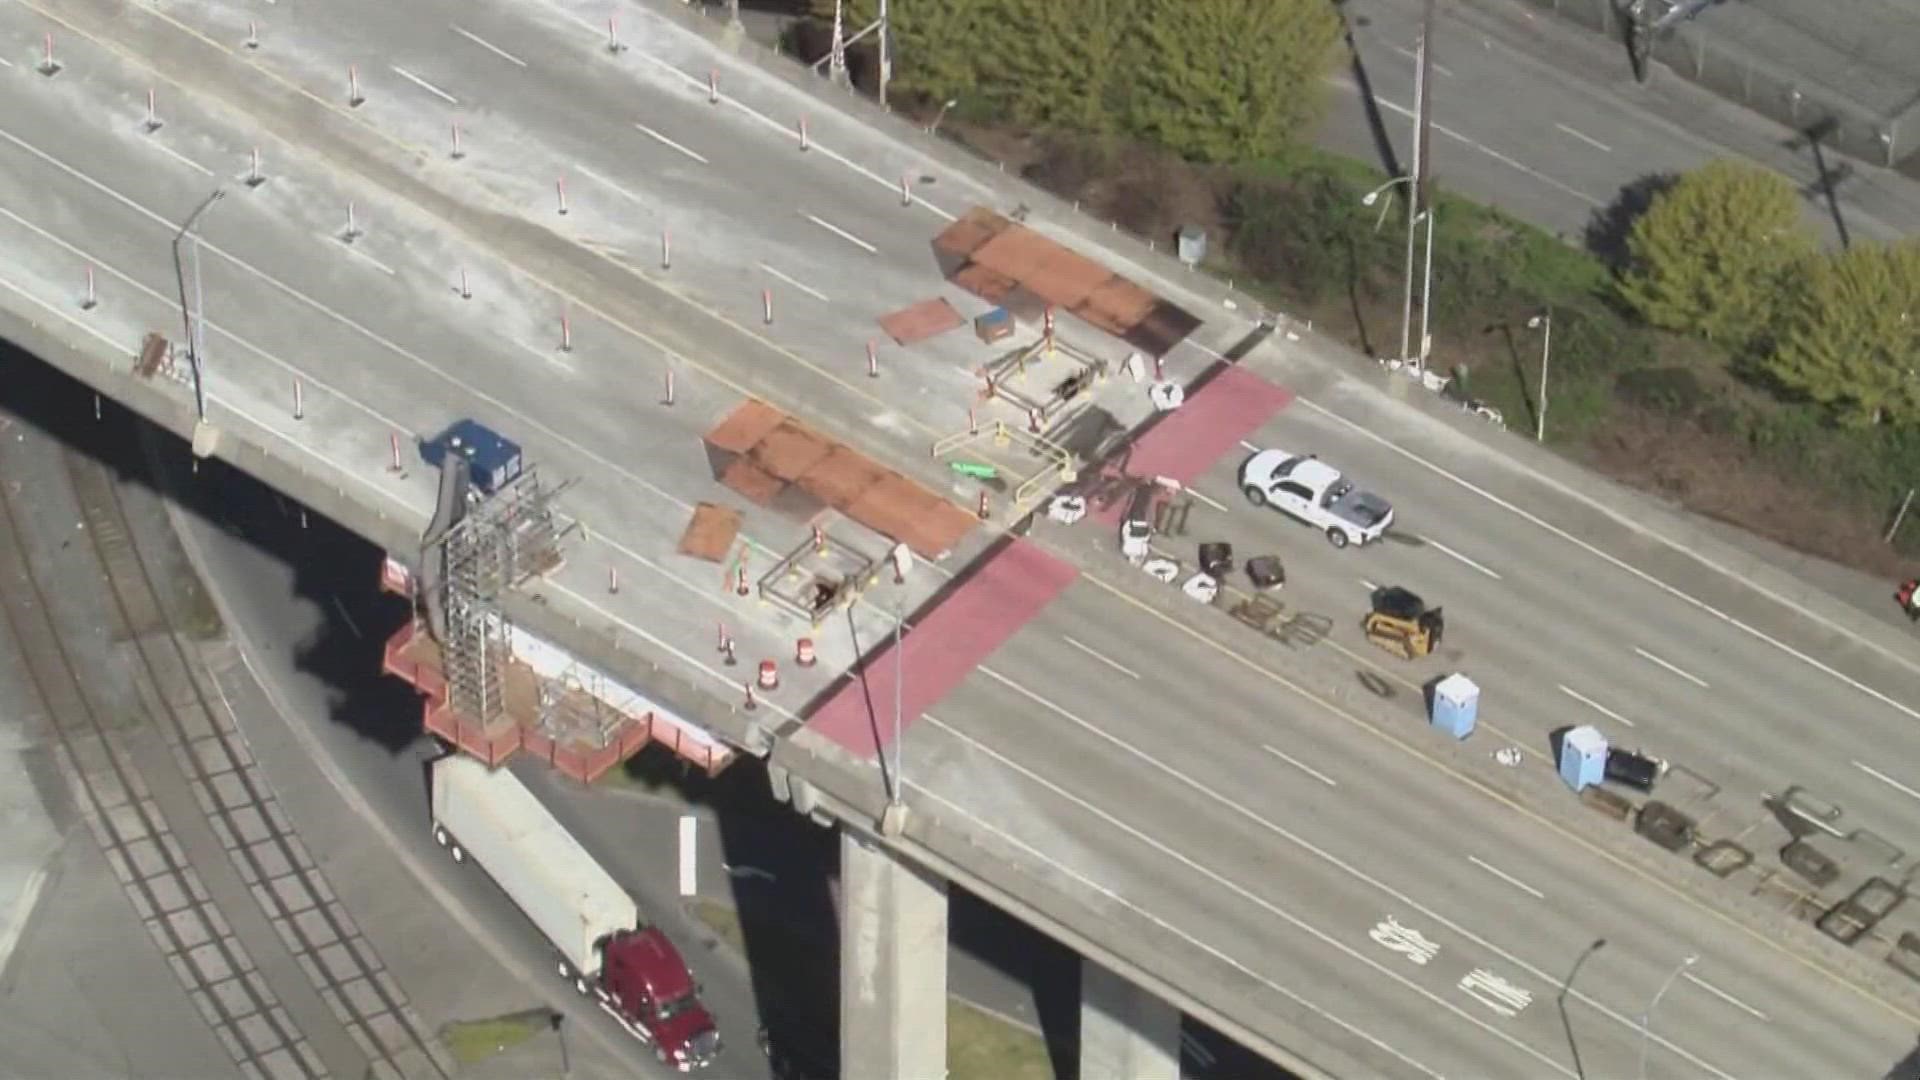 SDOT hopes to have drivers using the bridge again the week of September 12th